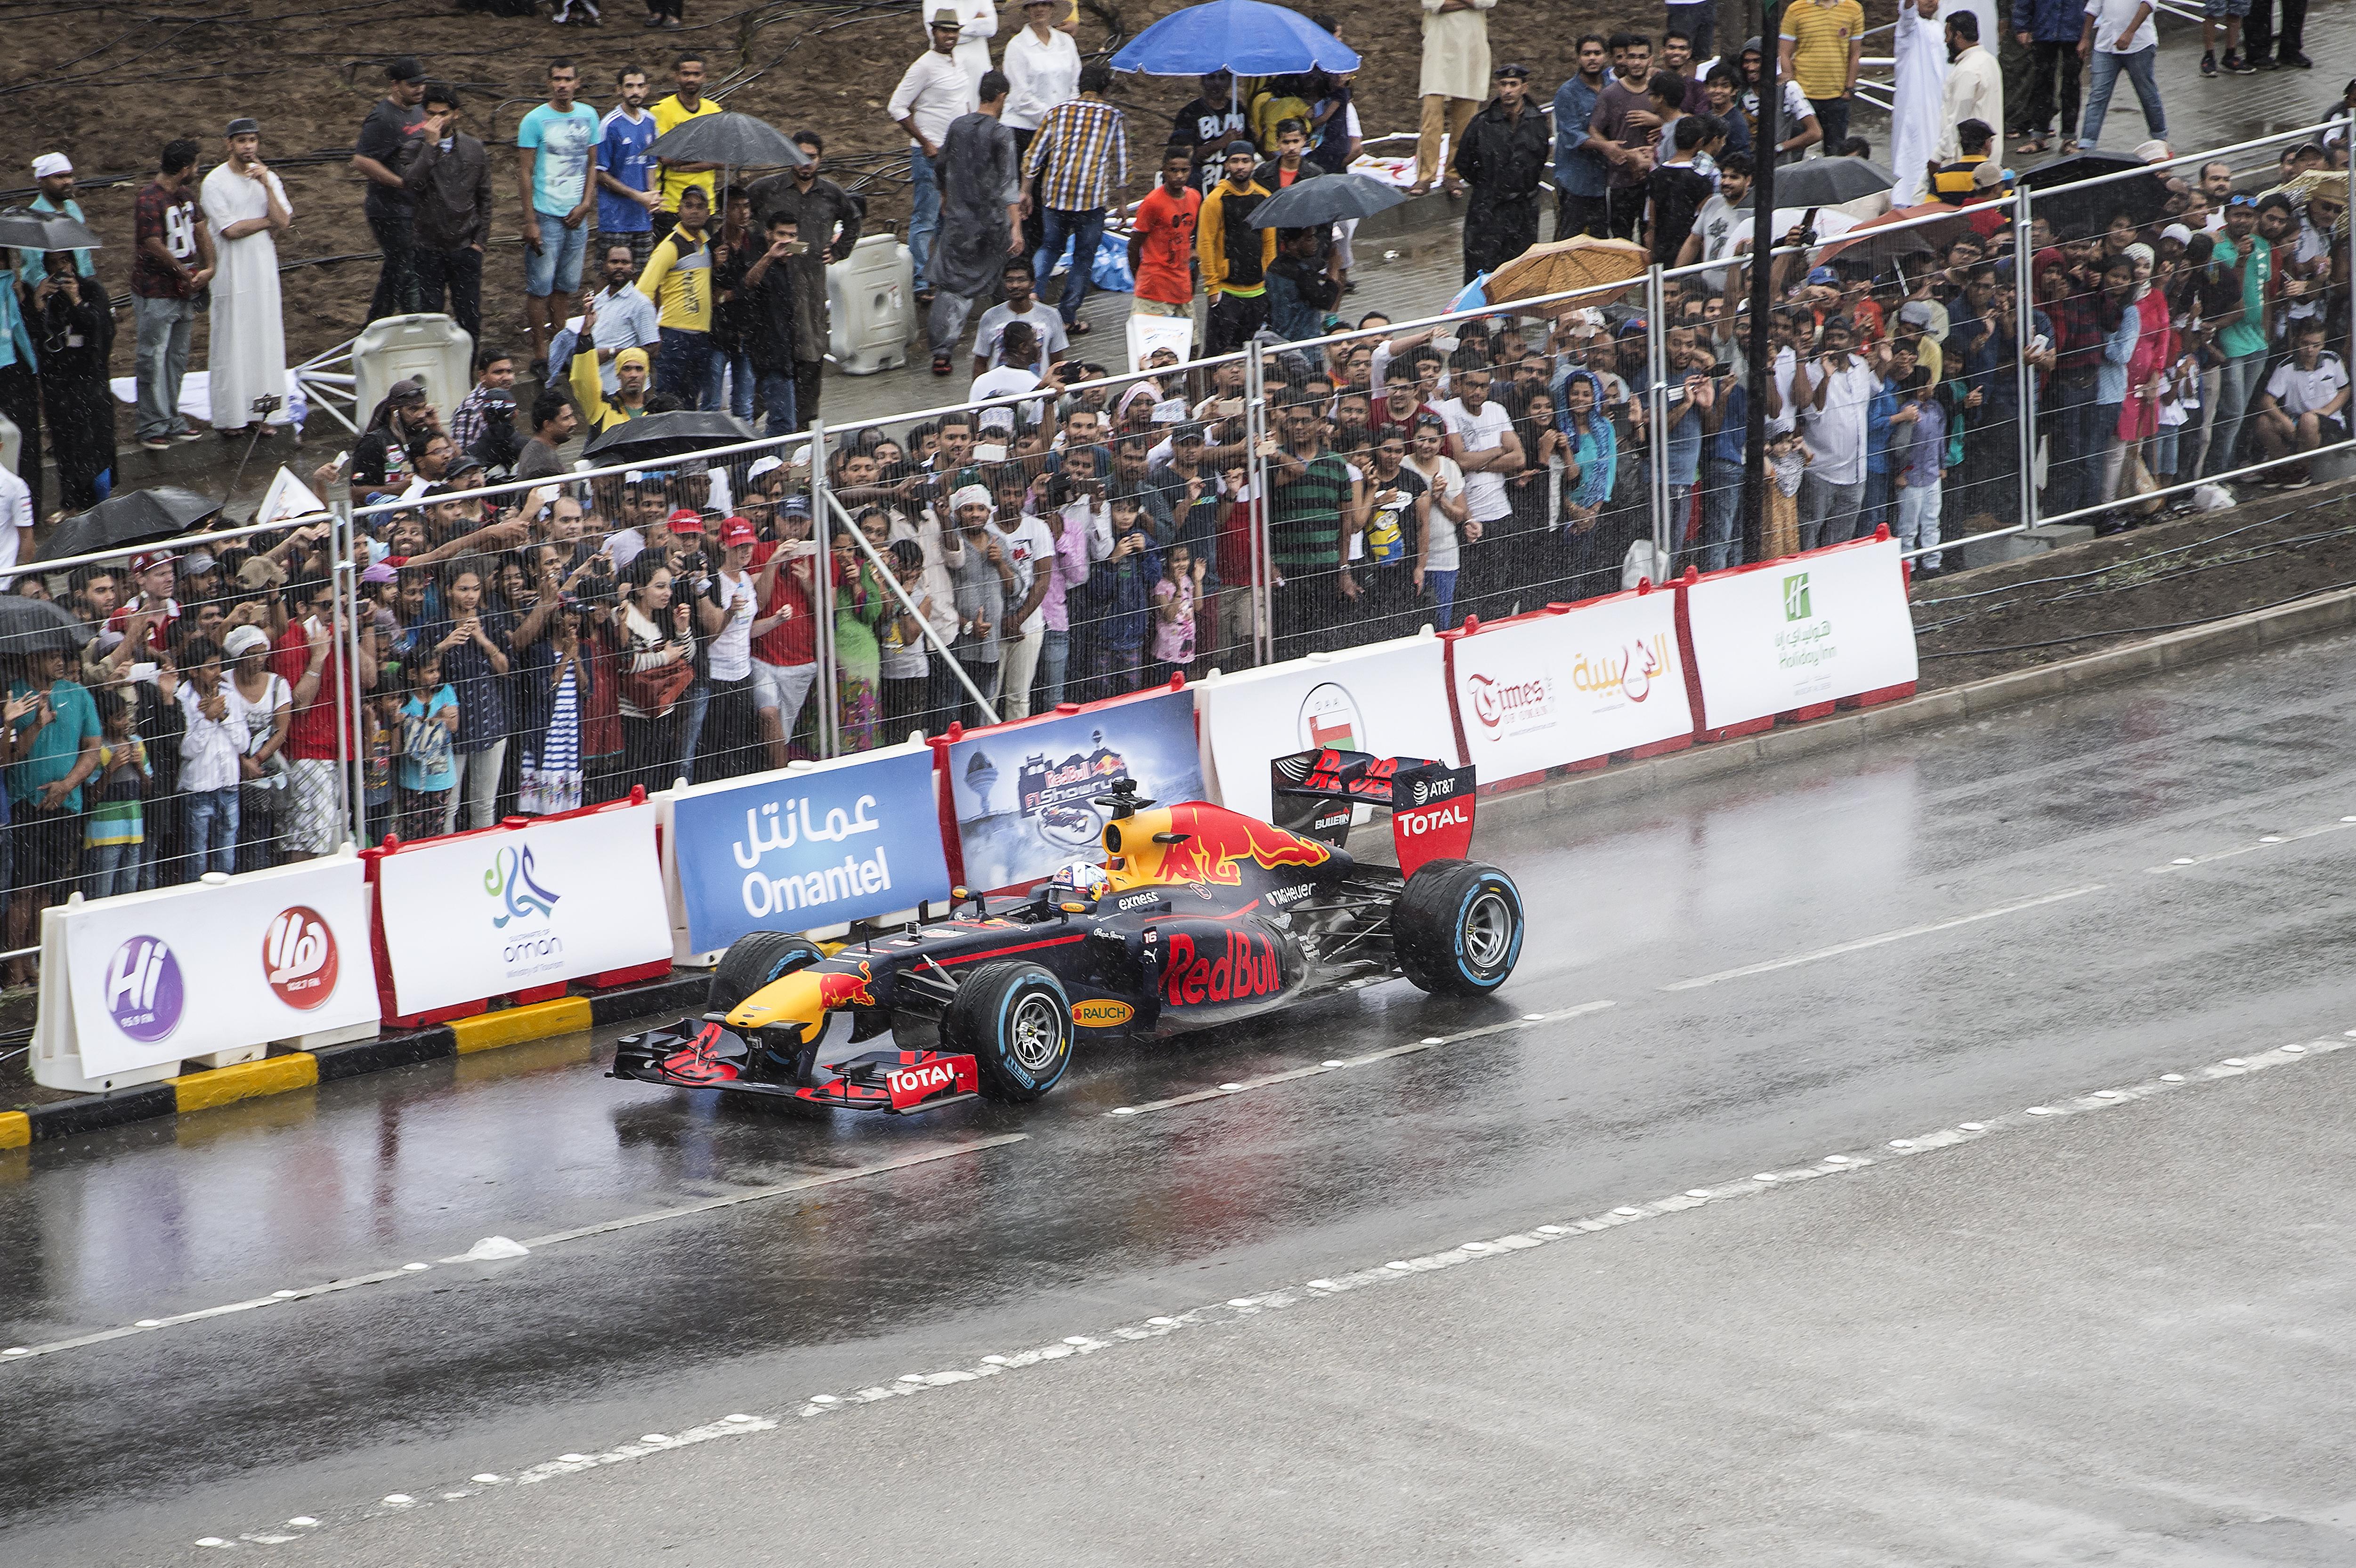 Oman’s first Red Bull F1 Showrun driver Coulthard finds it fantastic